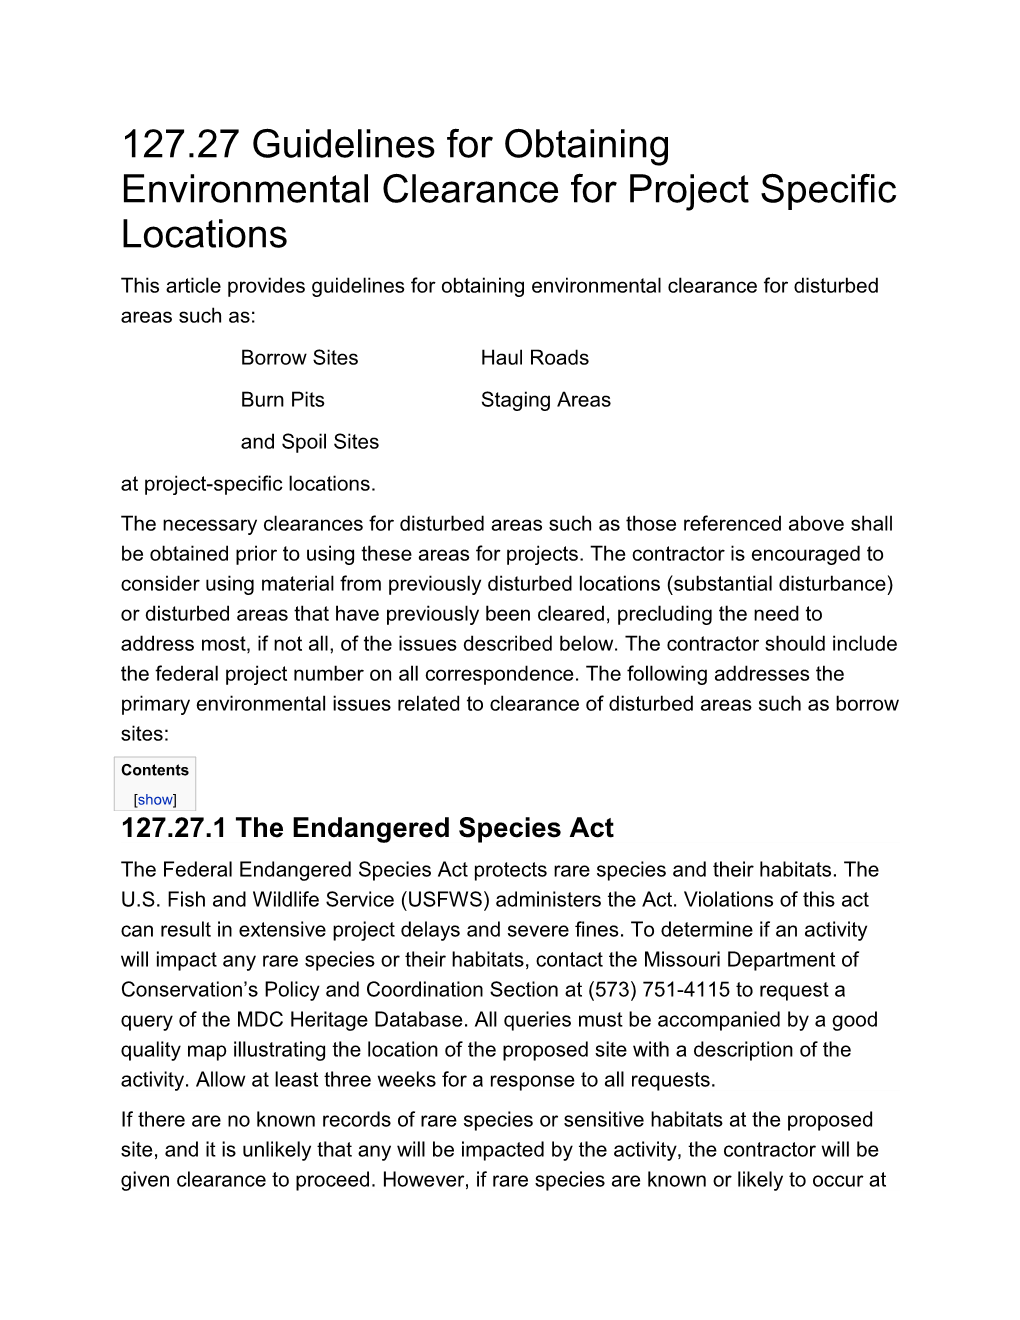 127.27 Guidelines for Obtaining Environmental Clearance for Project Specific Locations